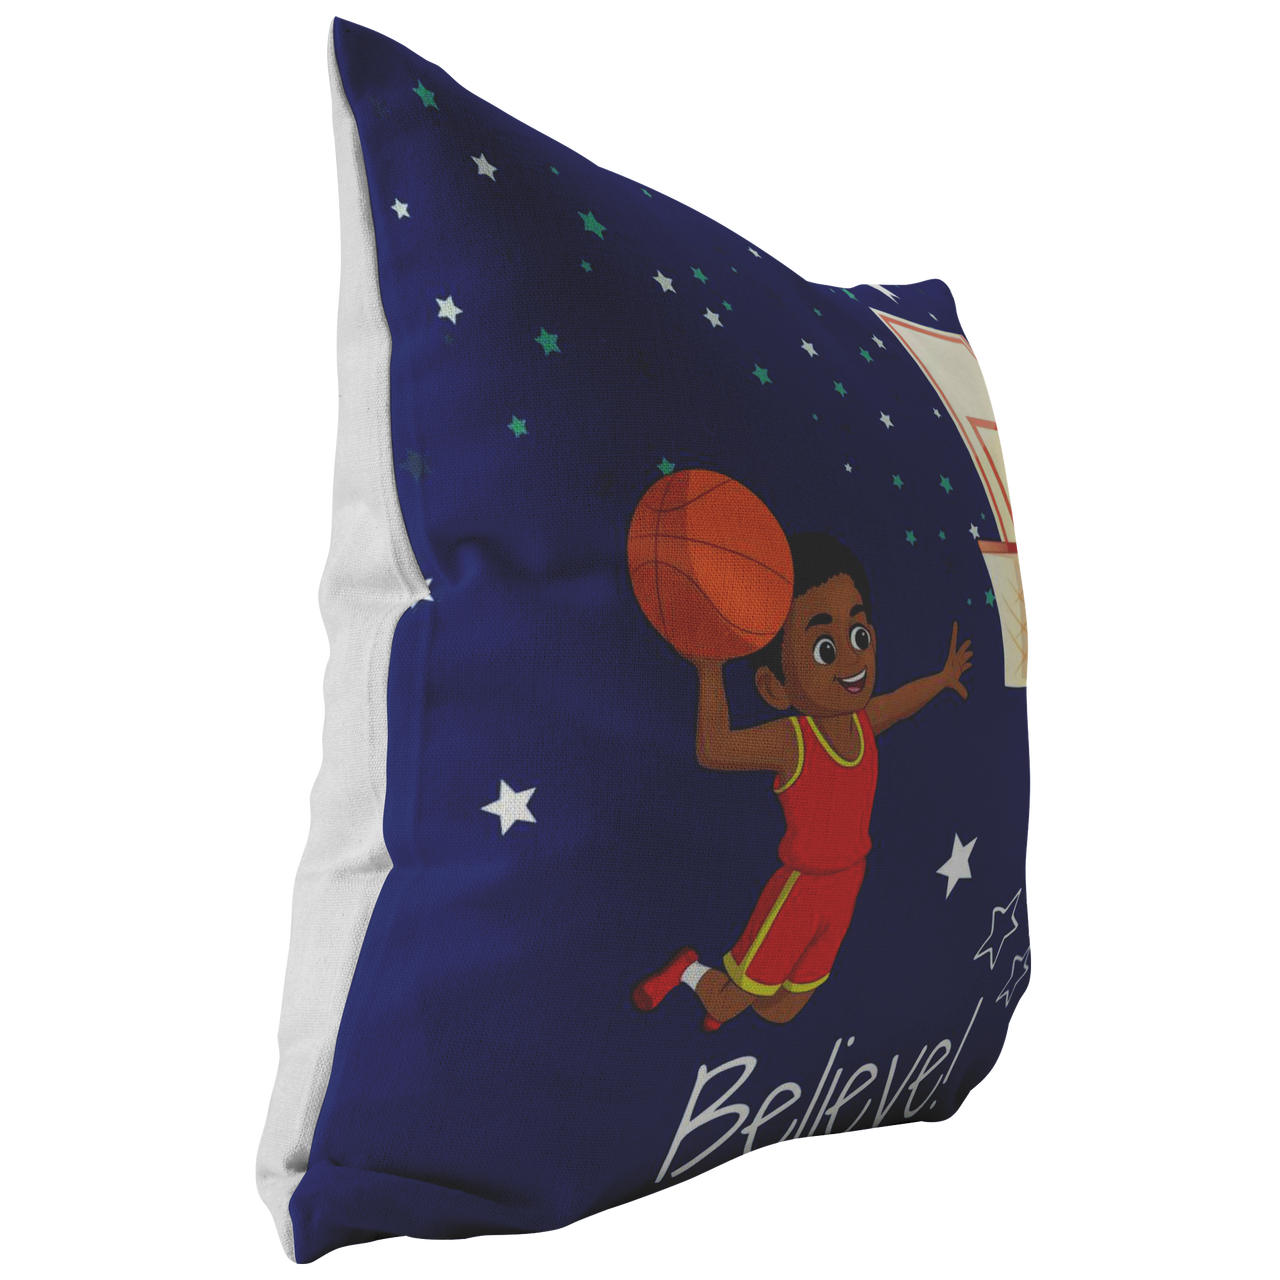 The I Believe Basketball Throw Pillow